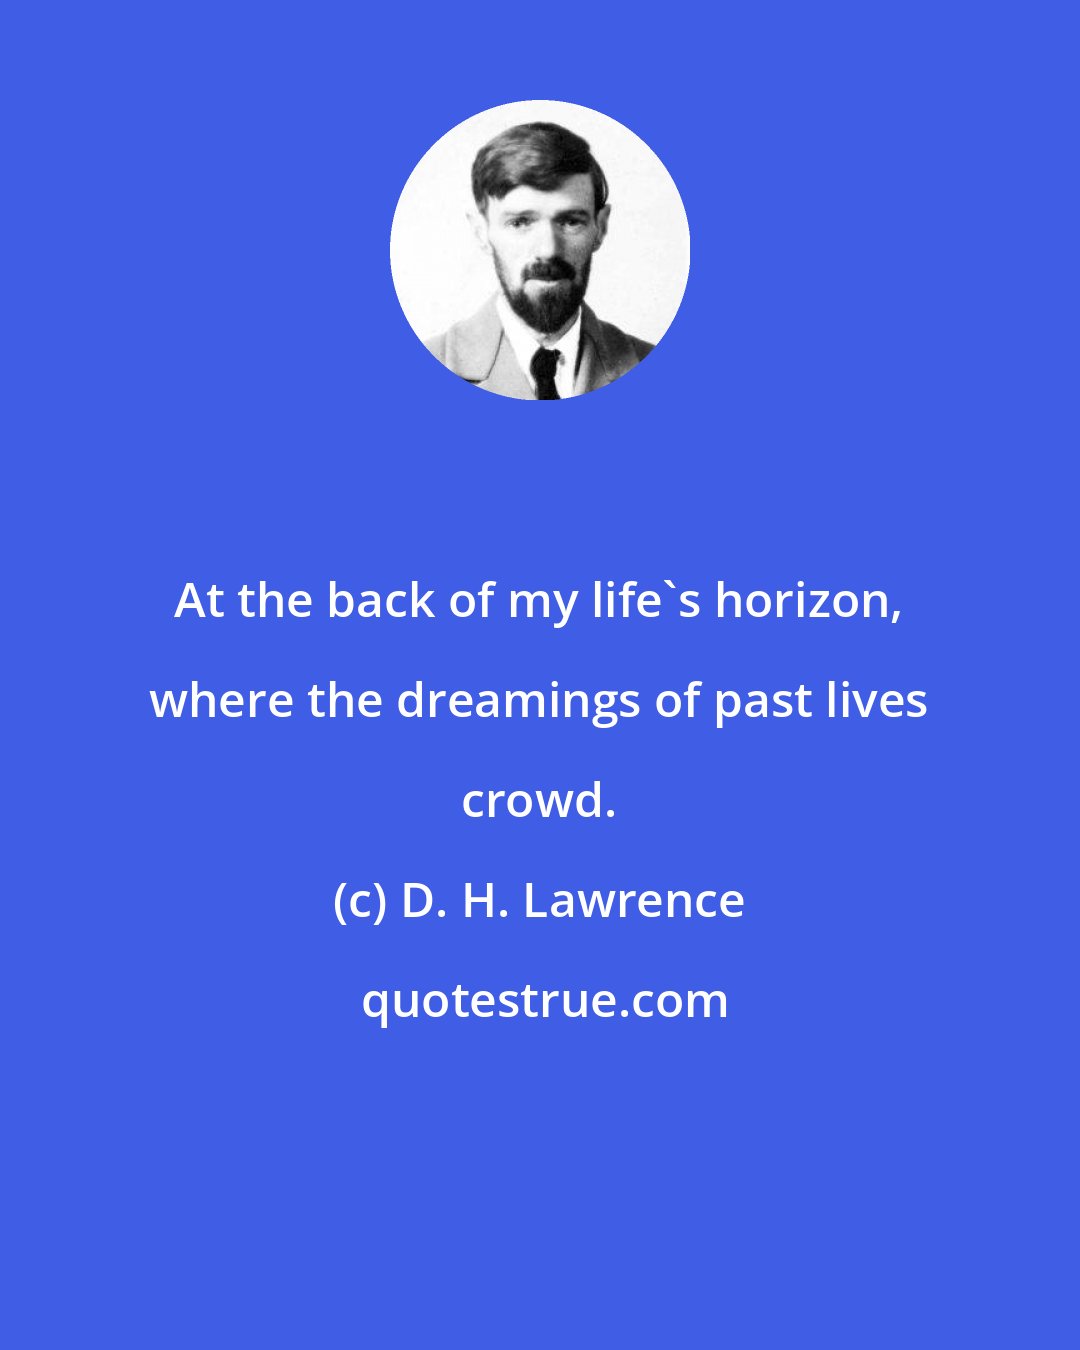 D. H. Lawrence: At the back of my life's horizon, where the dreamings of past lives crowd.